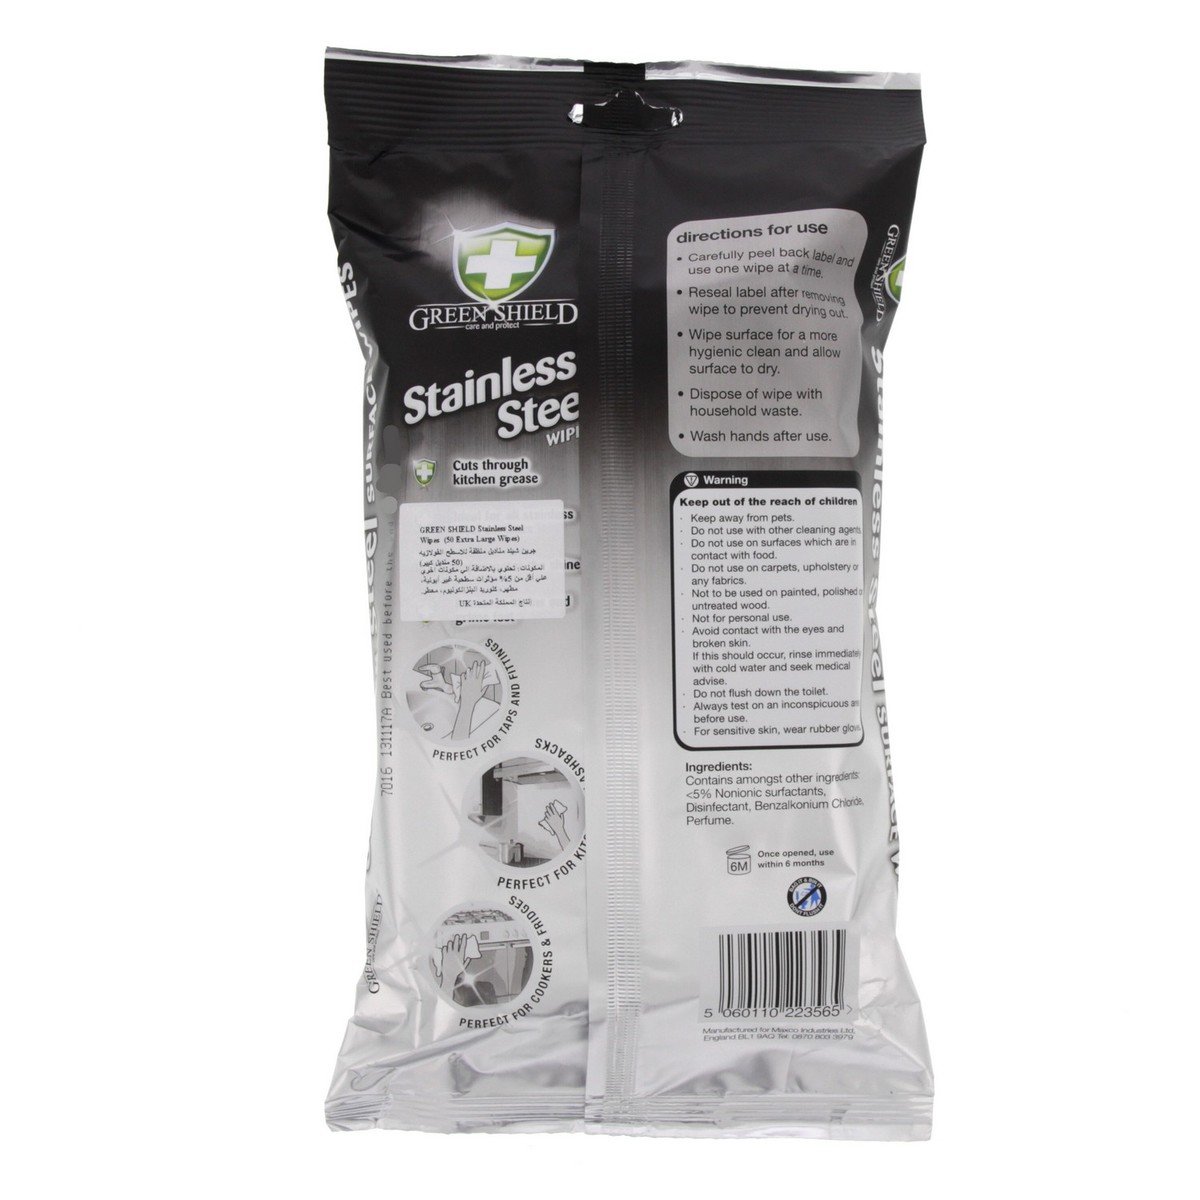 Green Shield Stainless Steel Wipes 50pcs